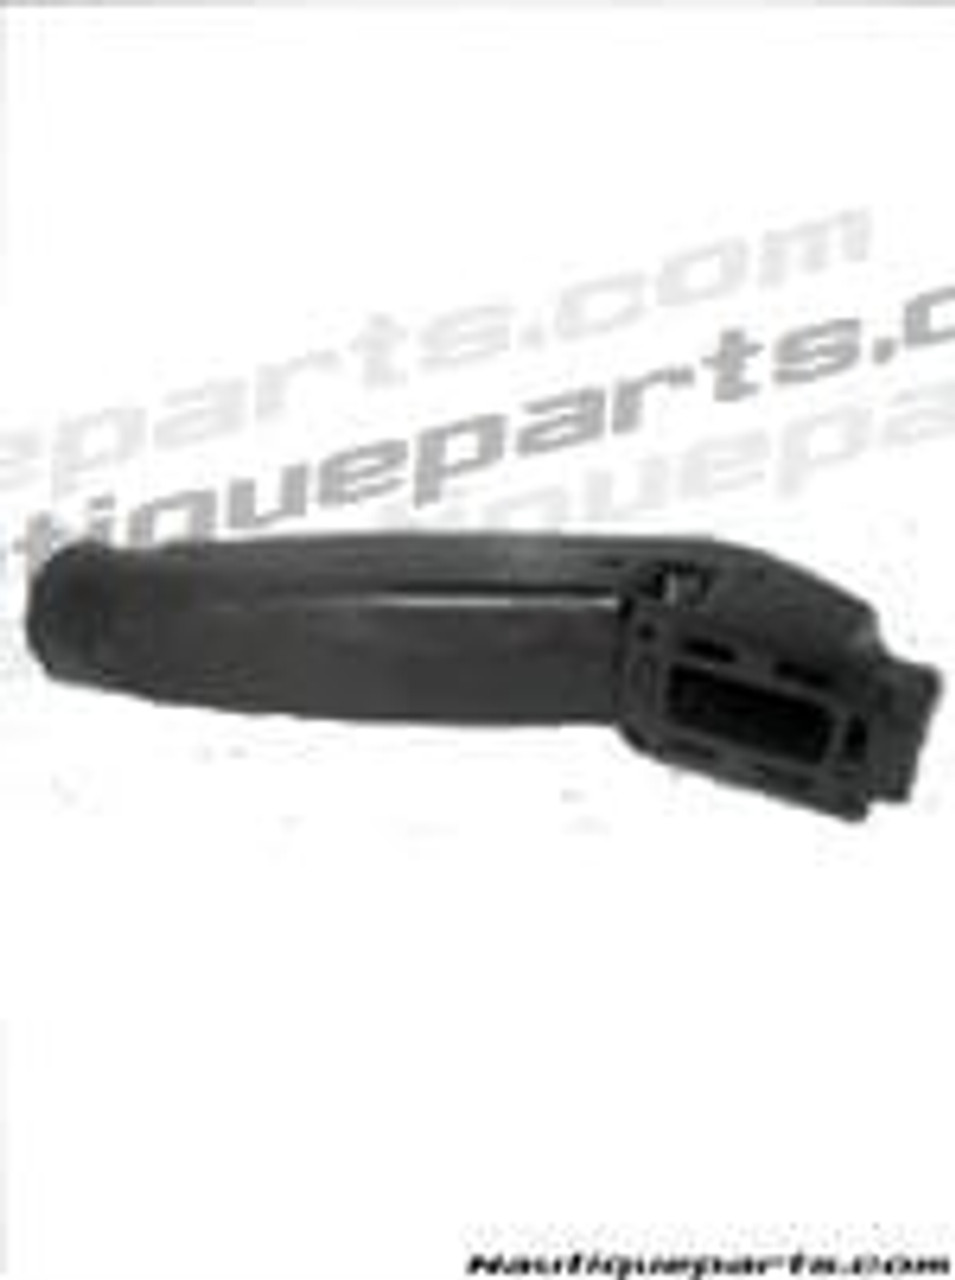 Exhaust Manifold Riser, PCM GM 454 BLOCK,  3.5 inch outlet, # R029004